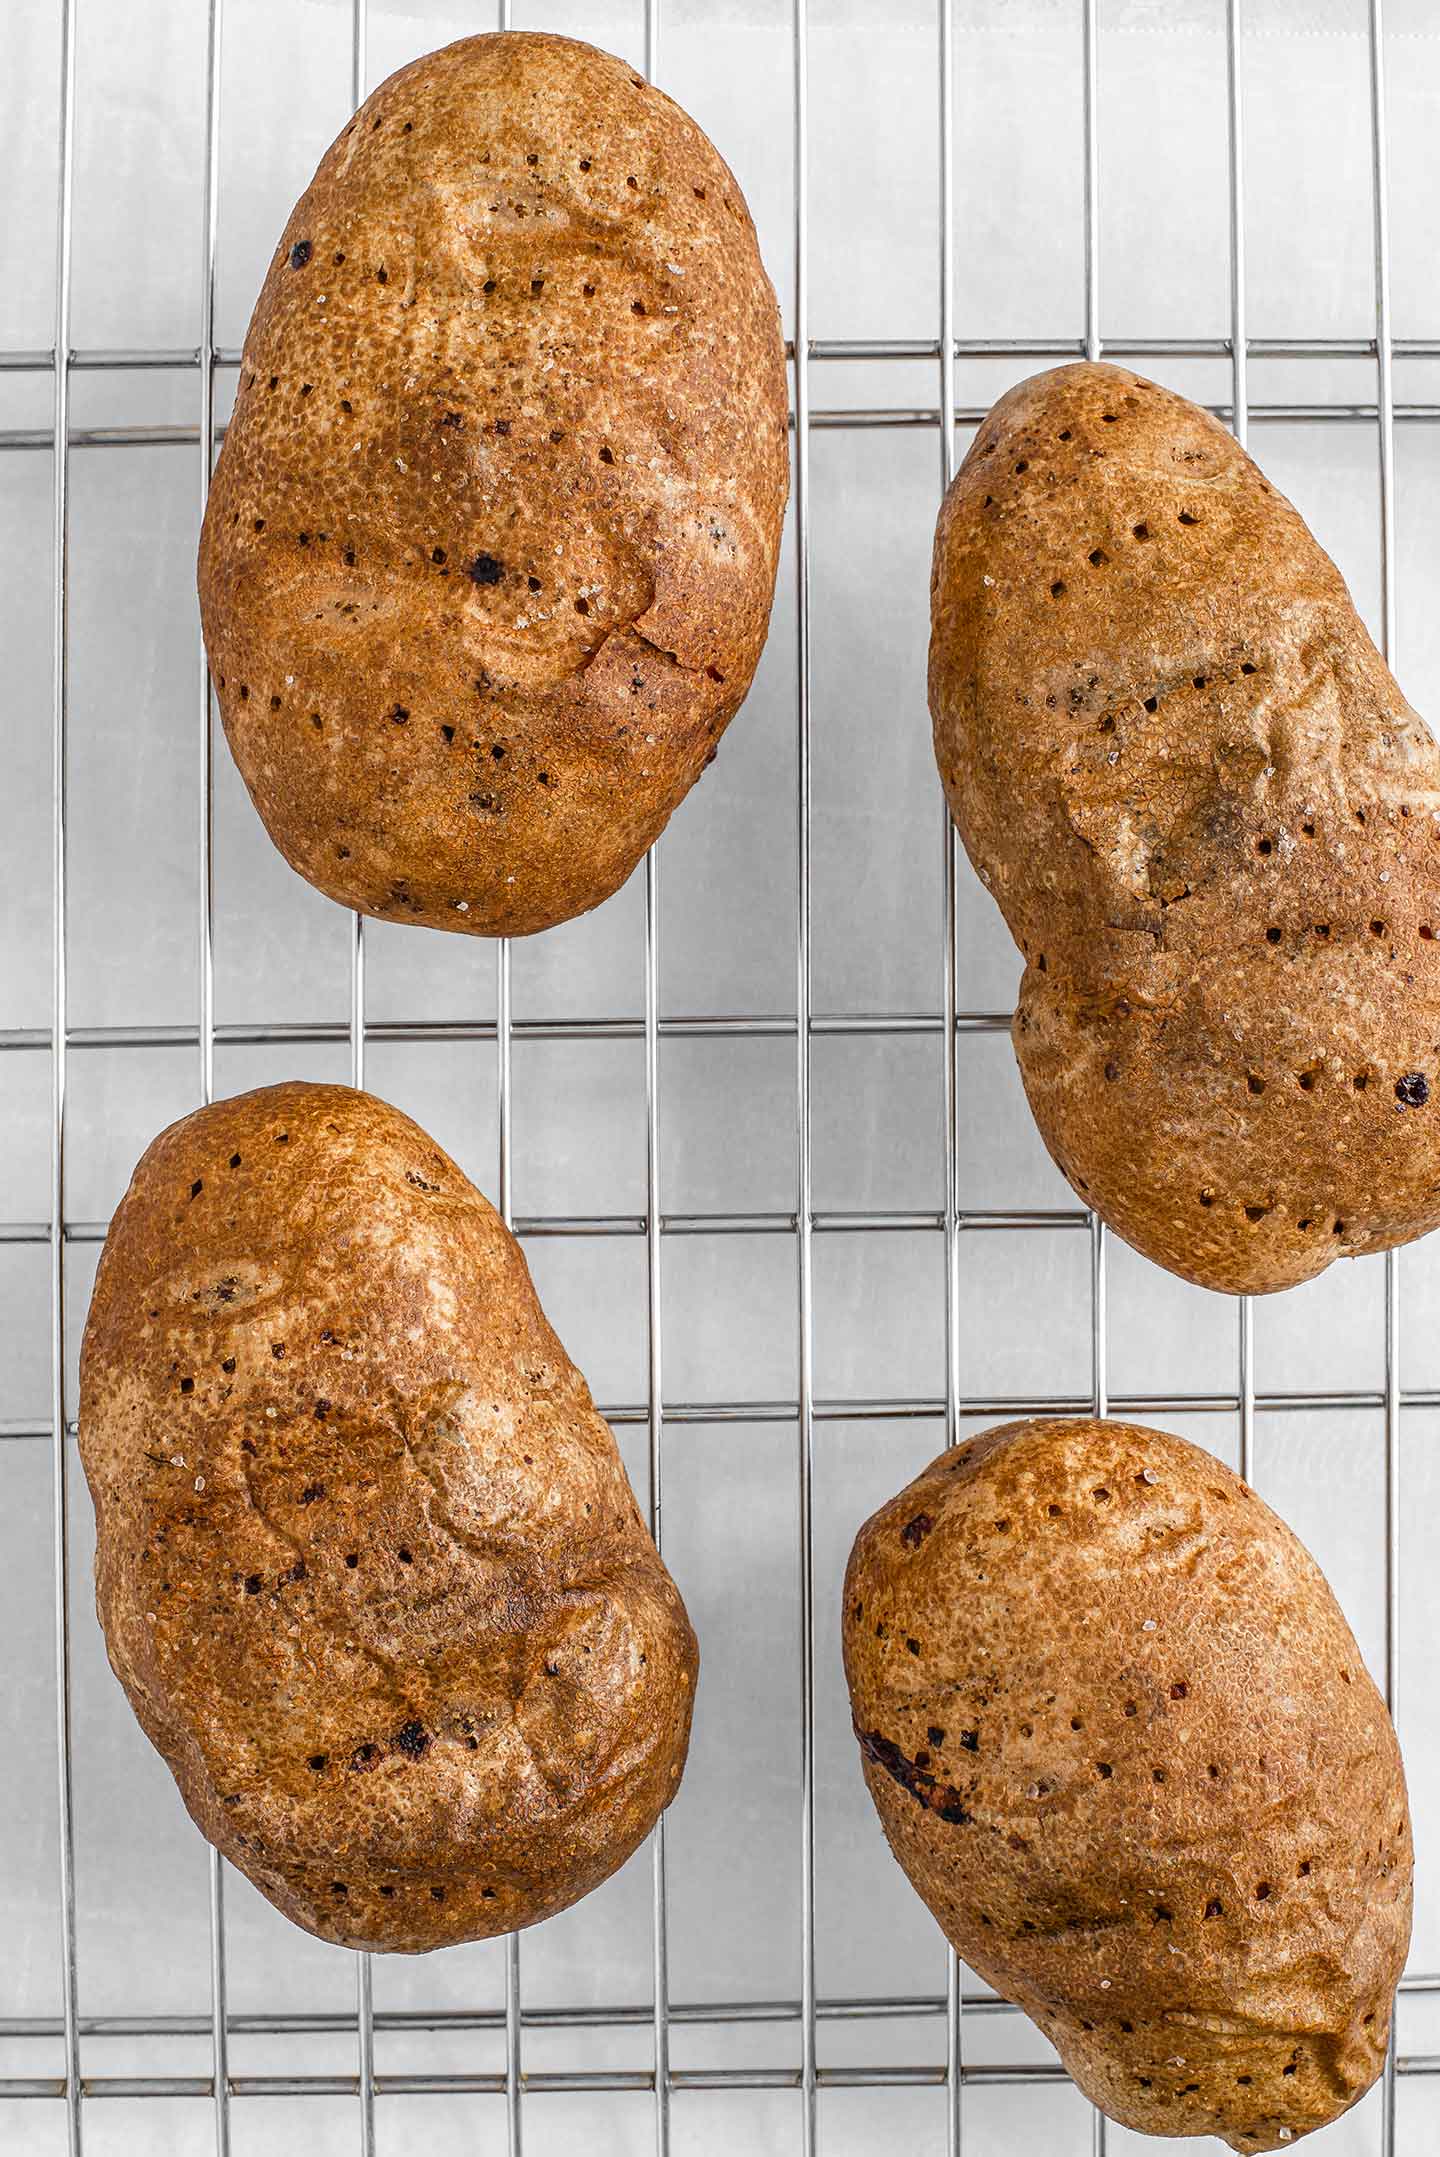 Top down view of four baked potatoes on a wire cooling rack. The skin is wrinkly, crispy, and the small holes are visible from being pierced with a fork before baking.